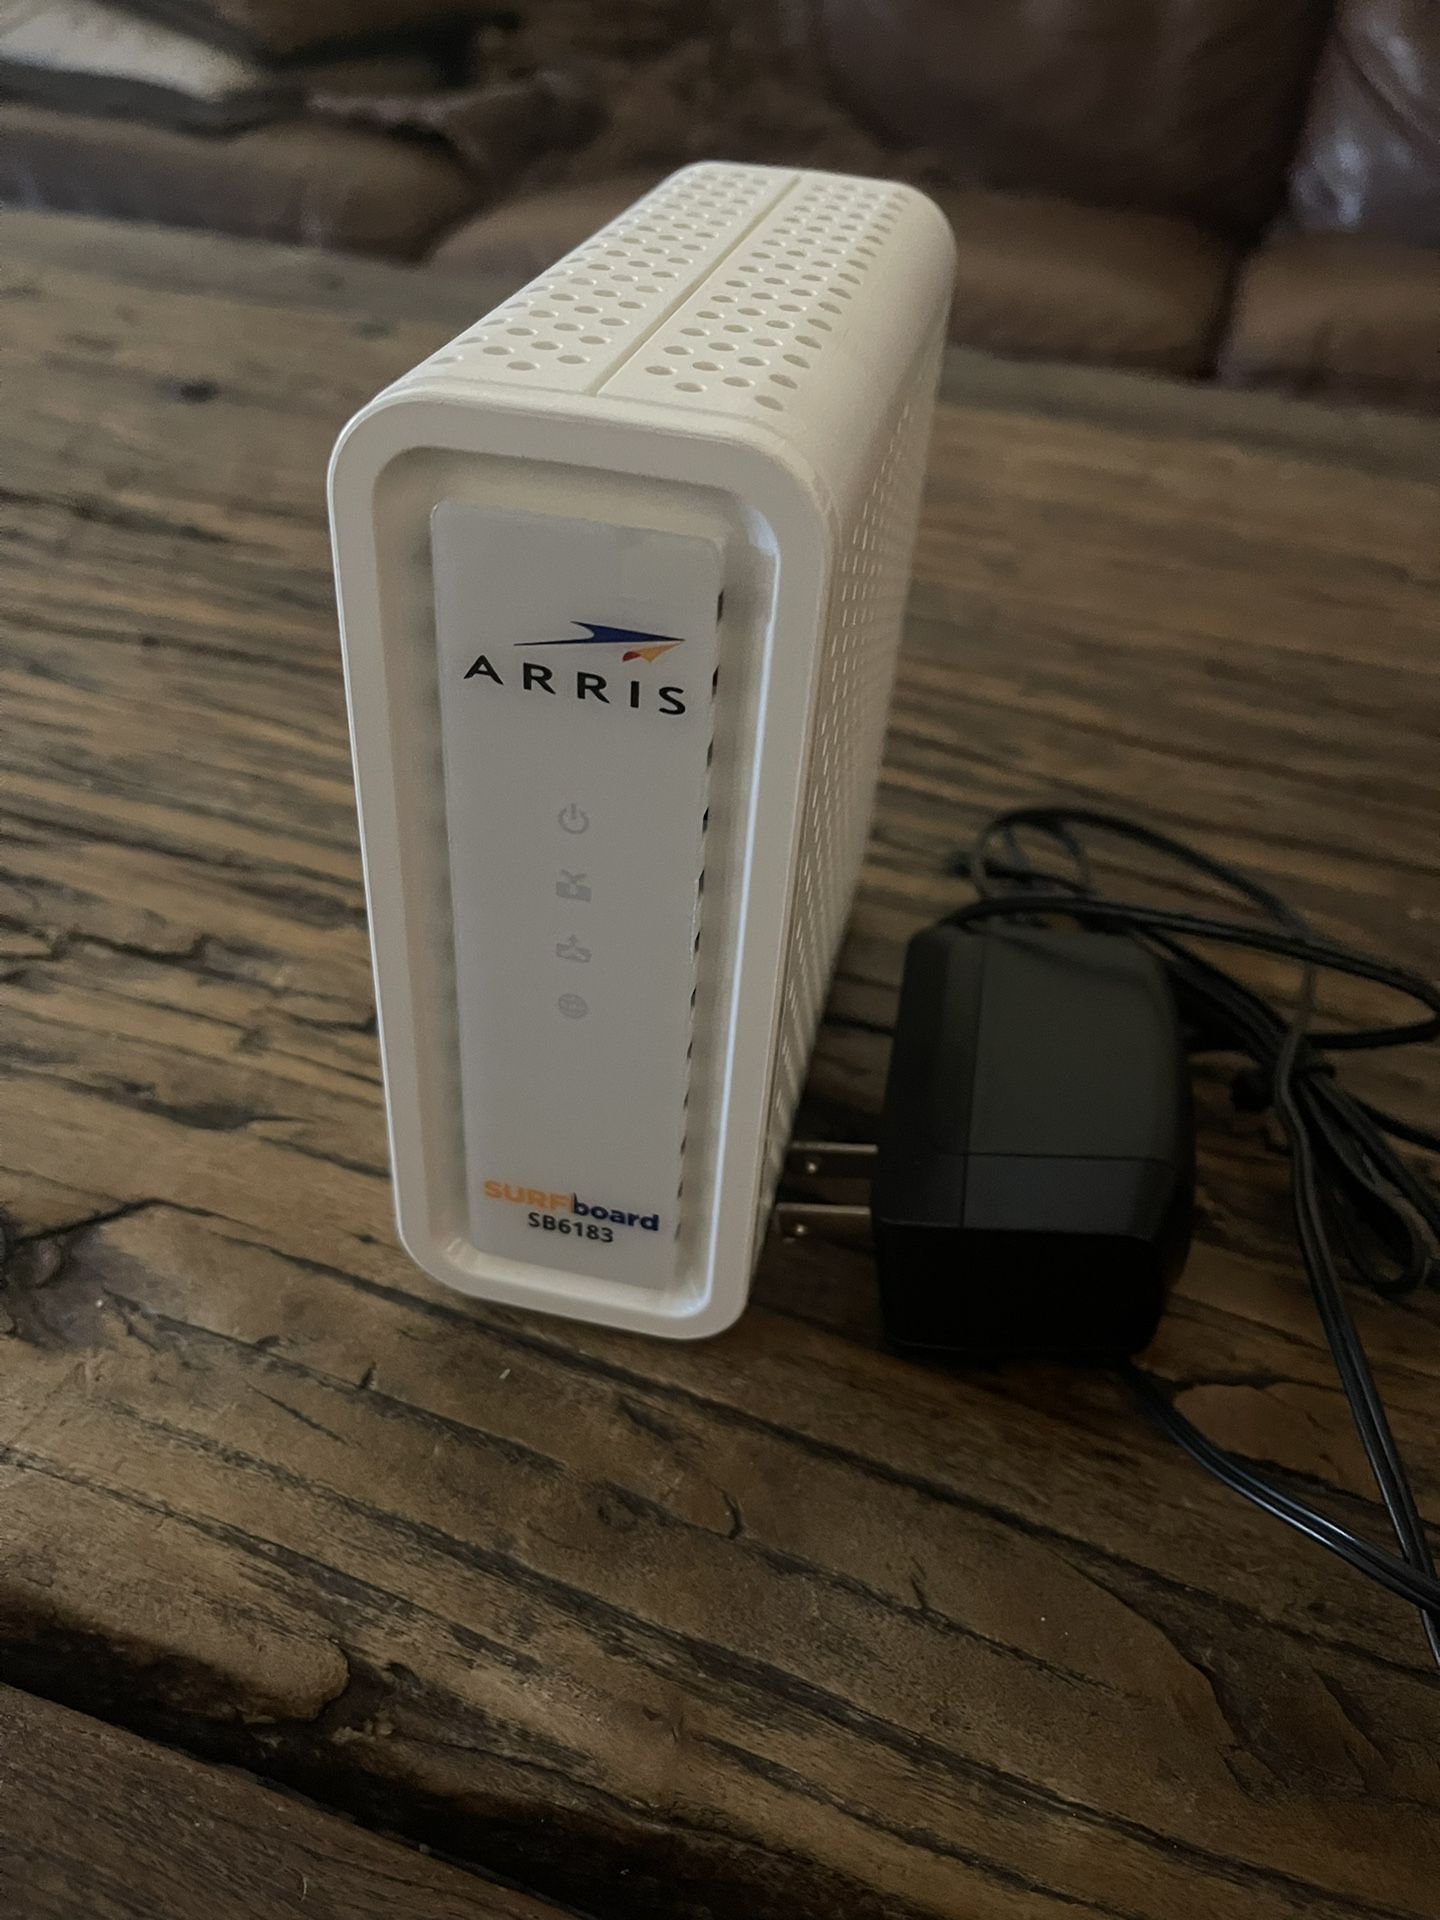 Arris Surfboard SB6183 Modem Used Previously For Cox Cable Internet 